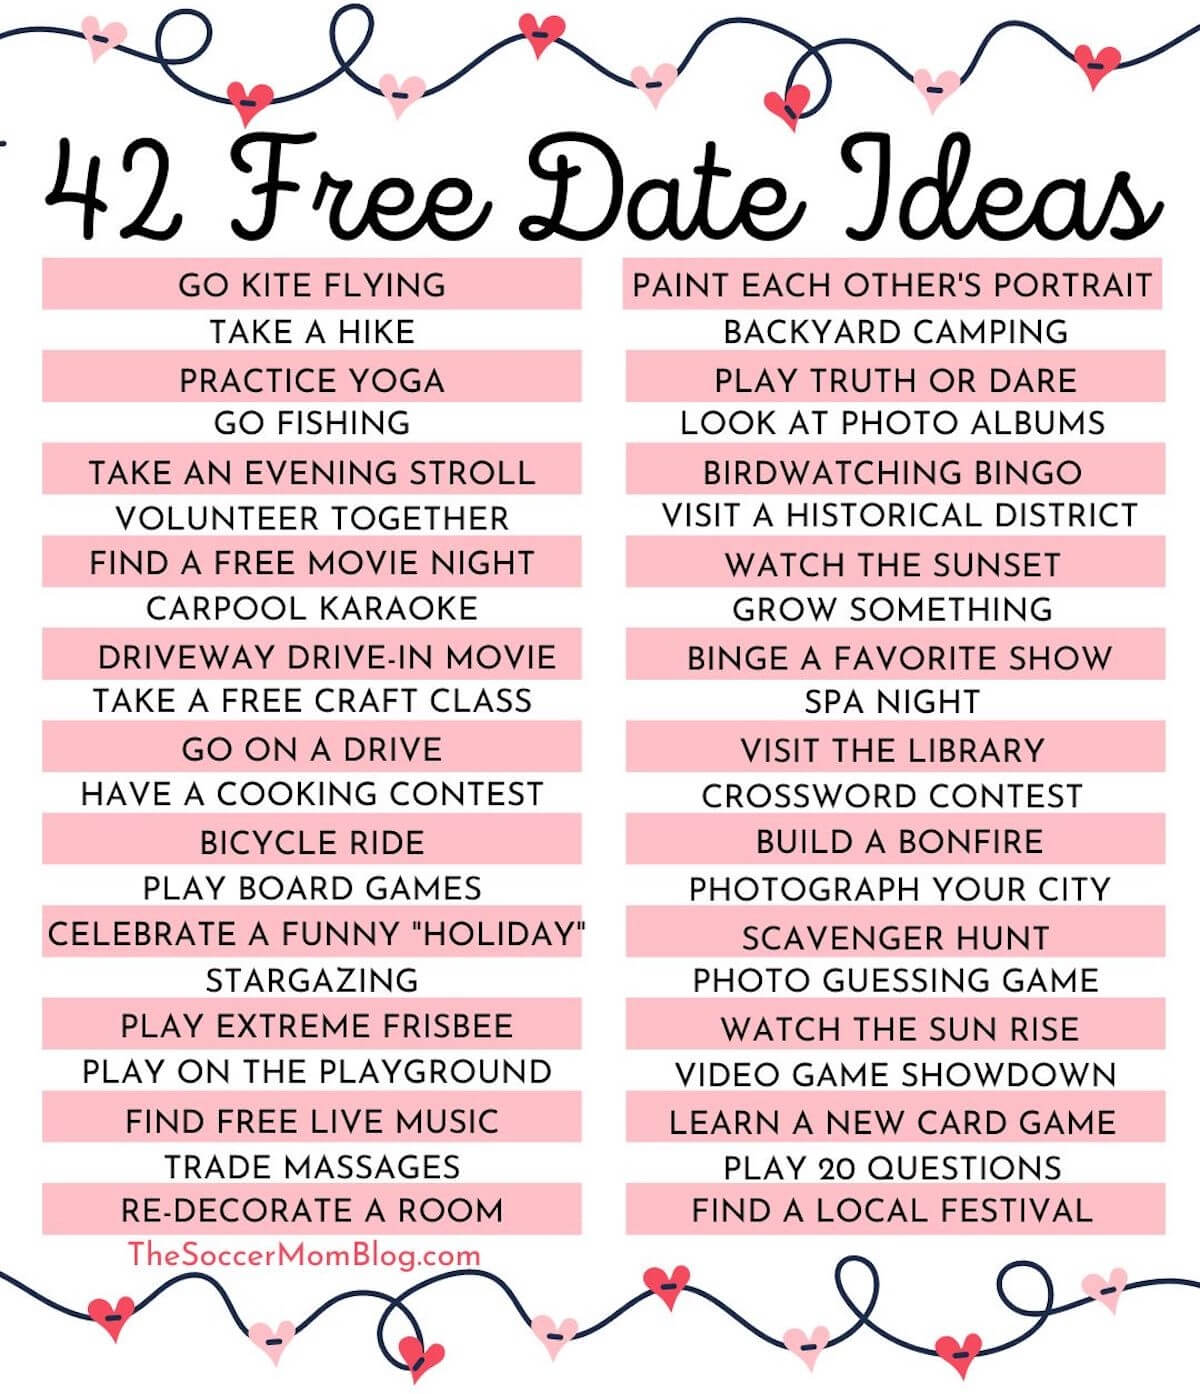 56 Free or Cheap Date Ideas (A Whole Year of Unique Ideas!)